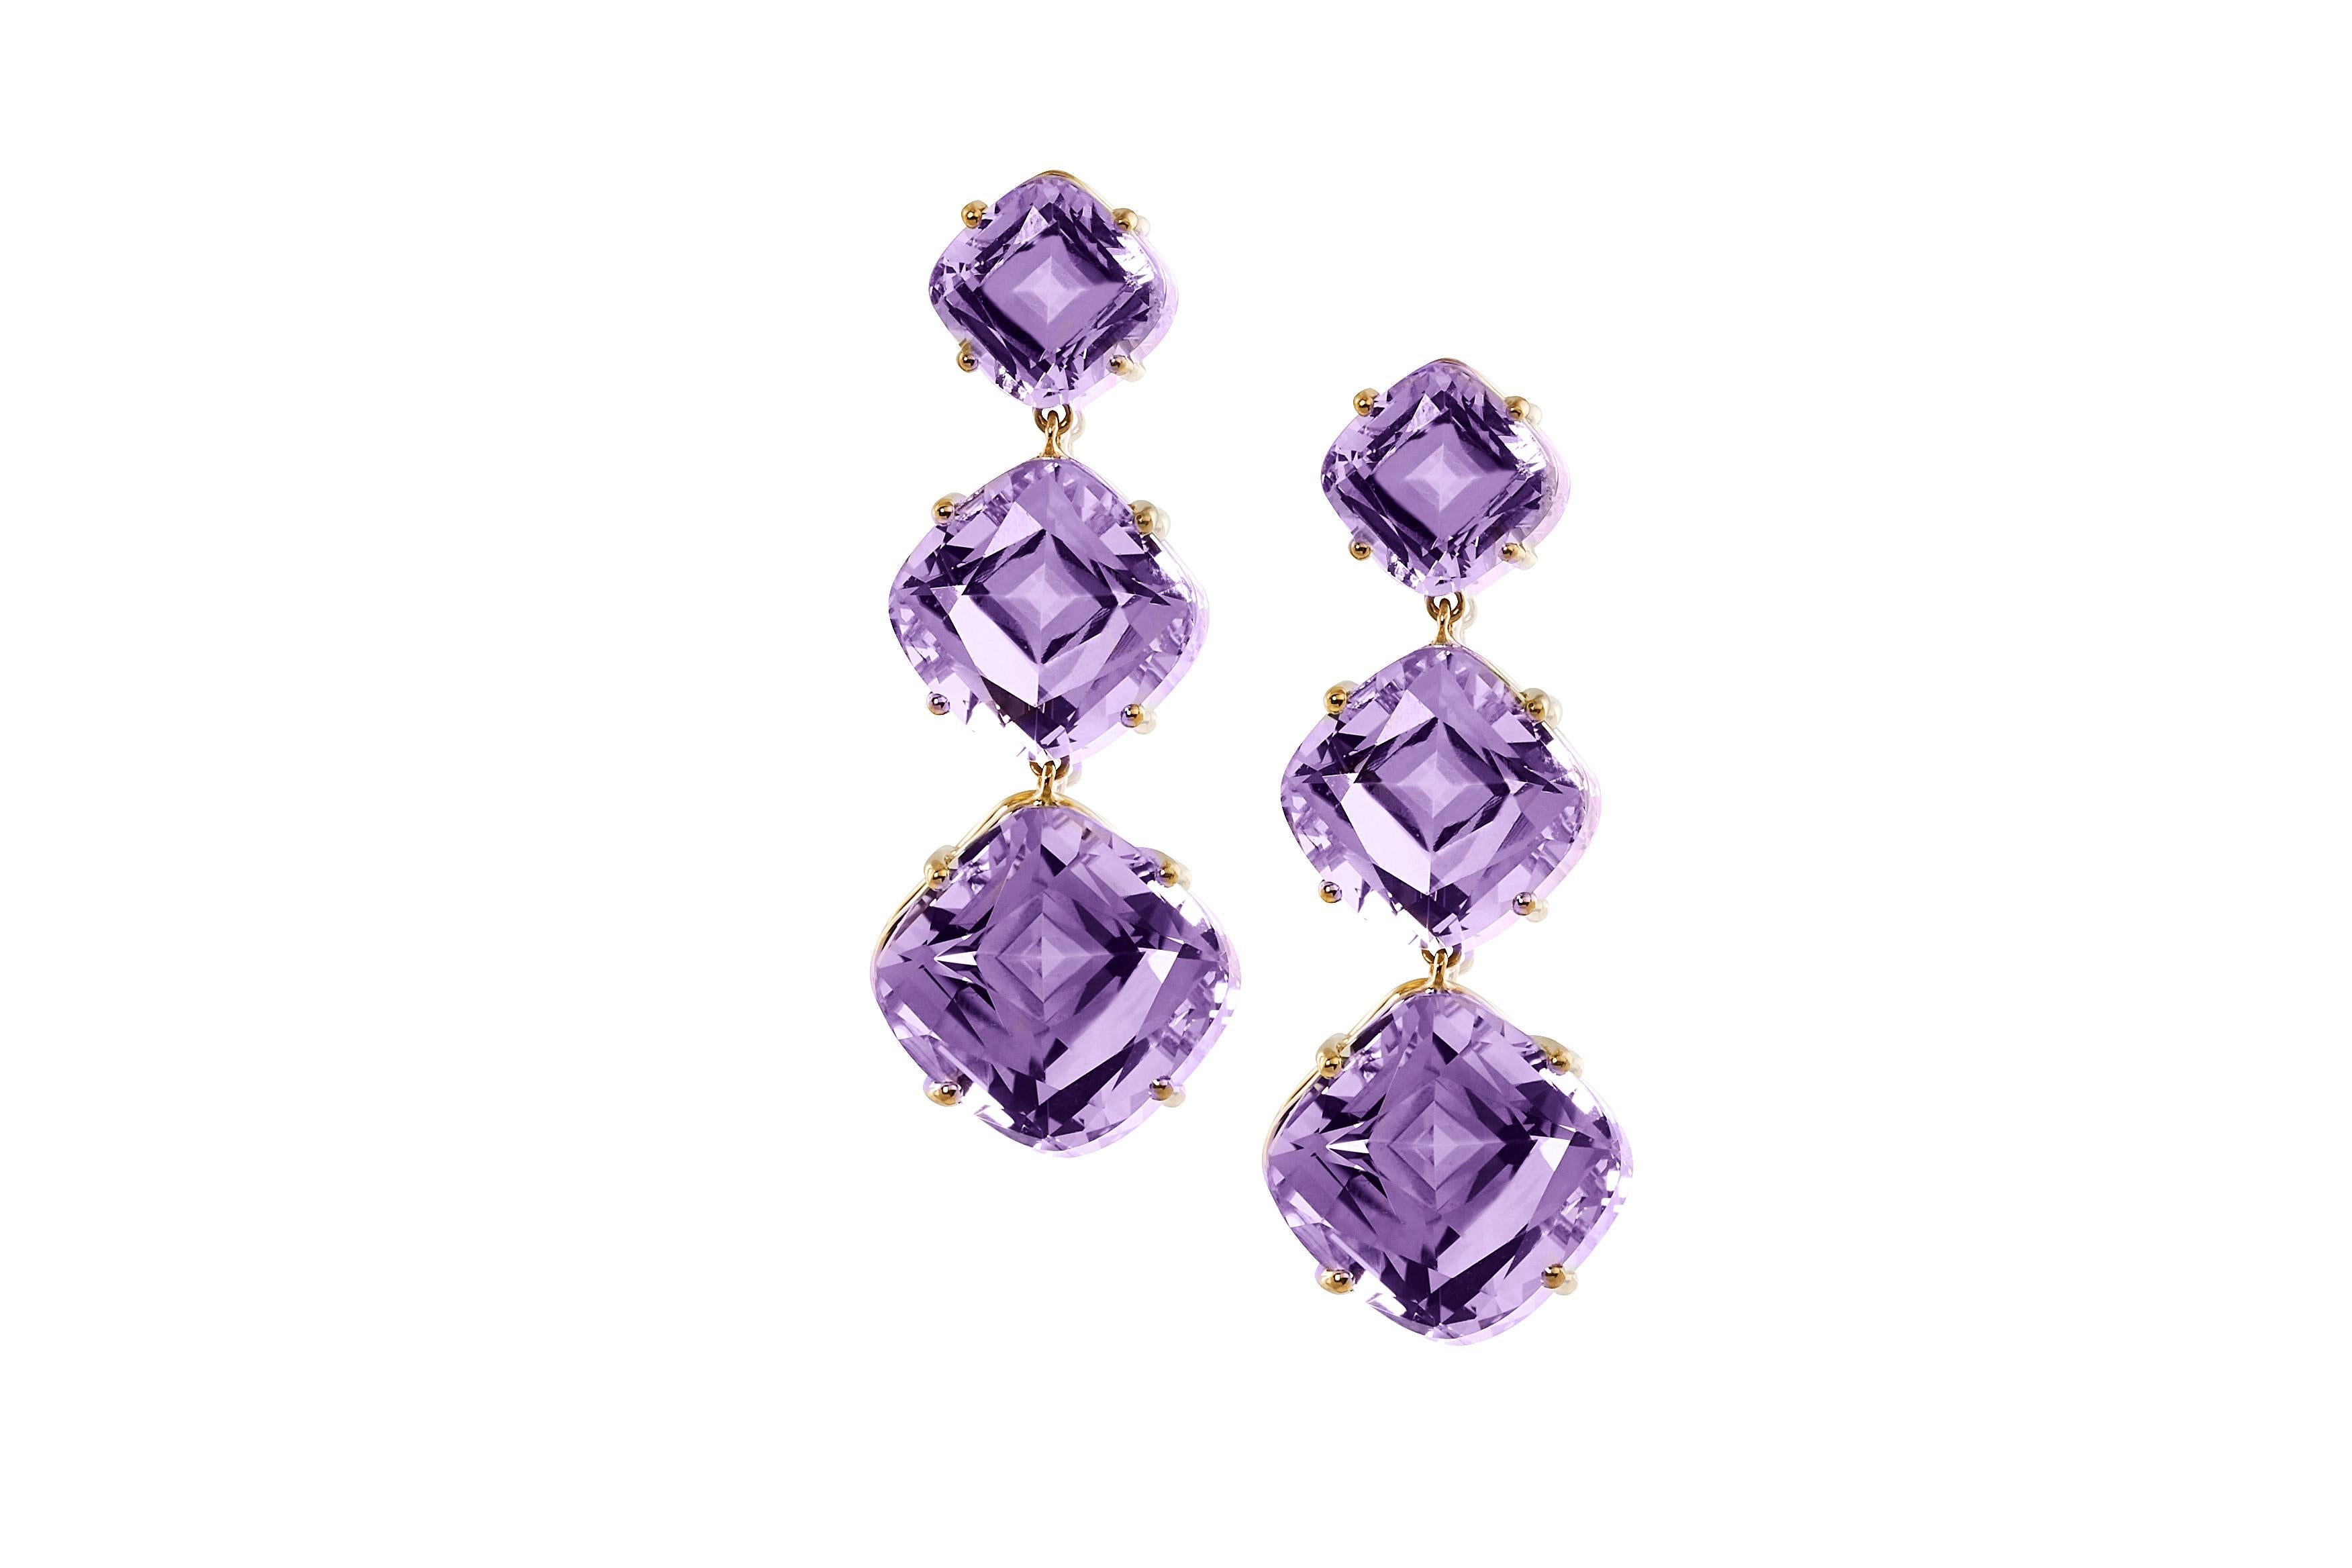 Amethyst Cushion Earrings in 18K Yellow Gold, from 'Gossip' Collection  

Stone Size: 9 x 9, 12 x 12, 14 x 14 mm
